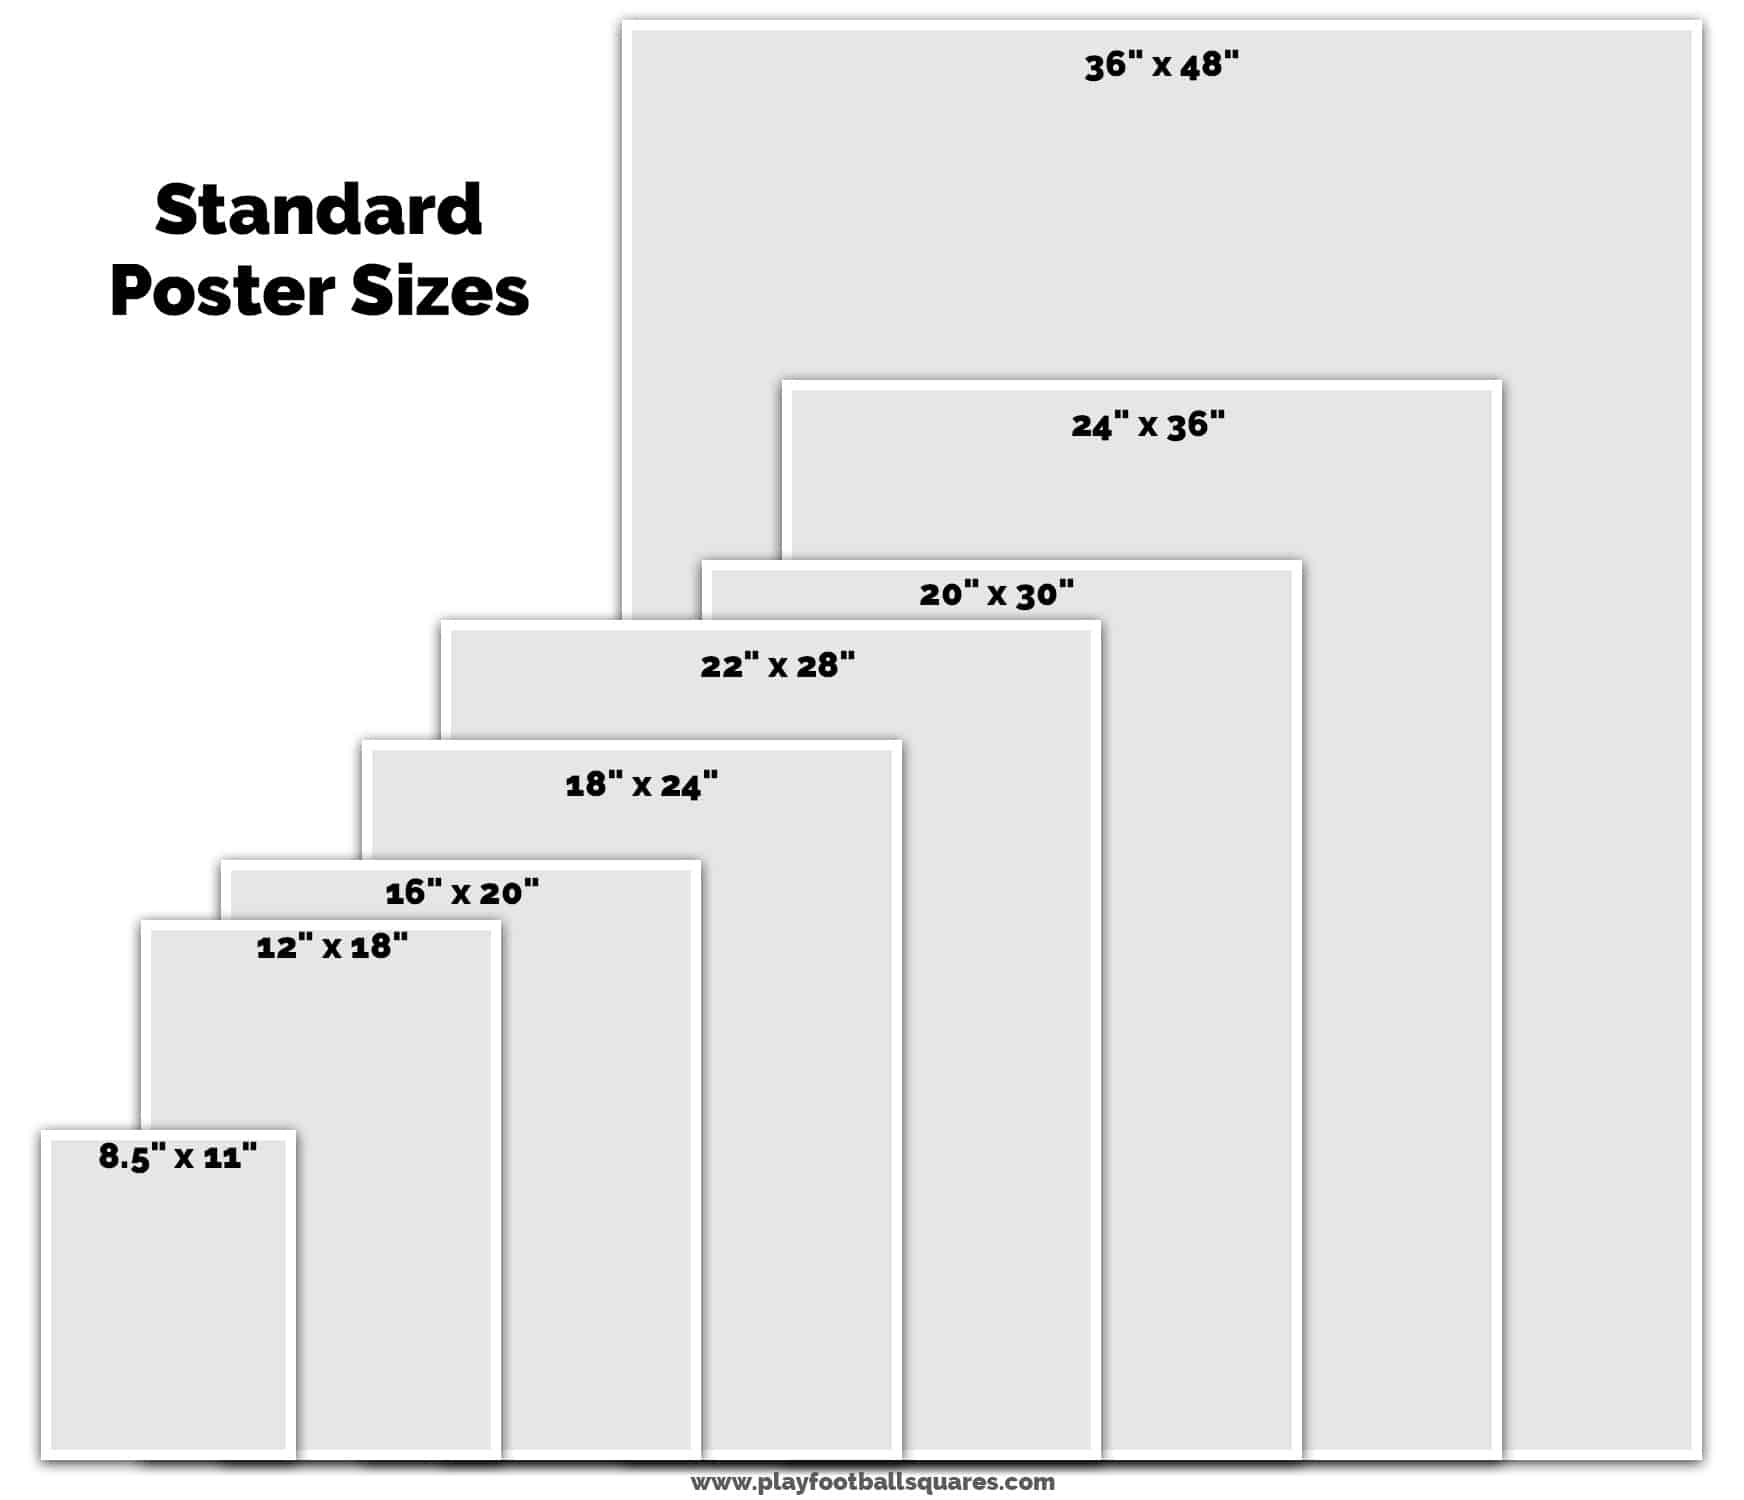 standard poster sizes compared from 8.5 x 11 to 36 x 48